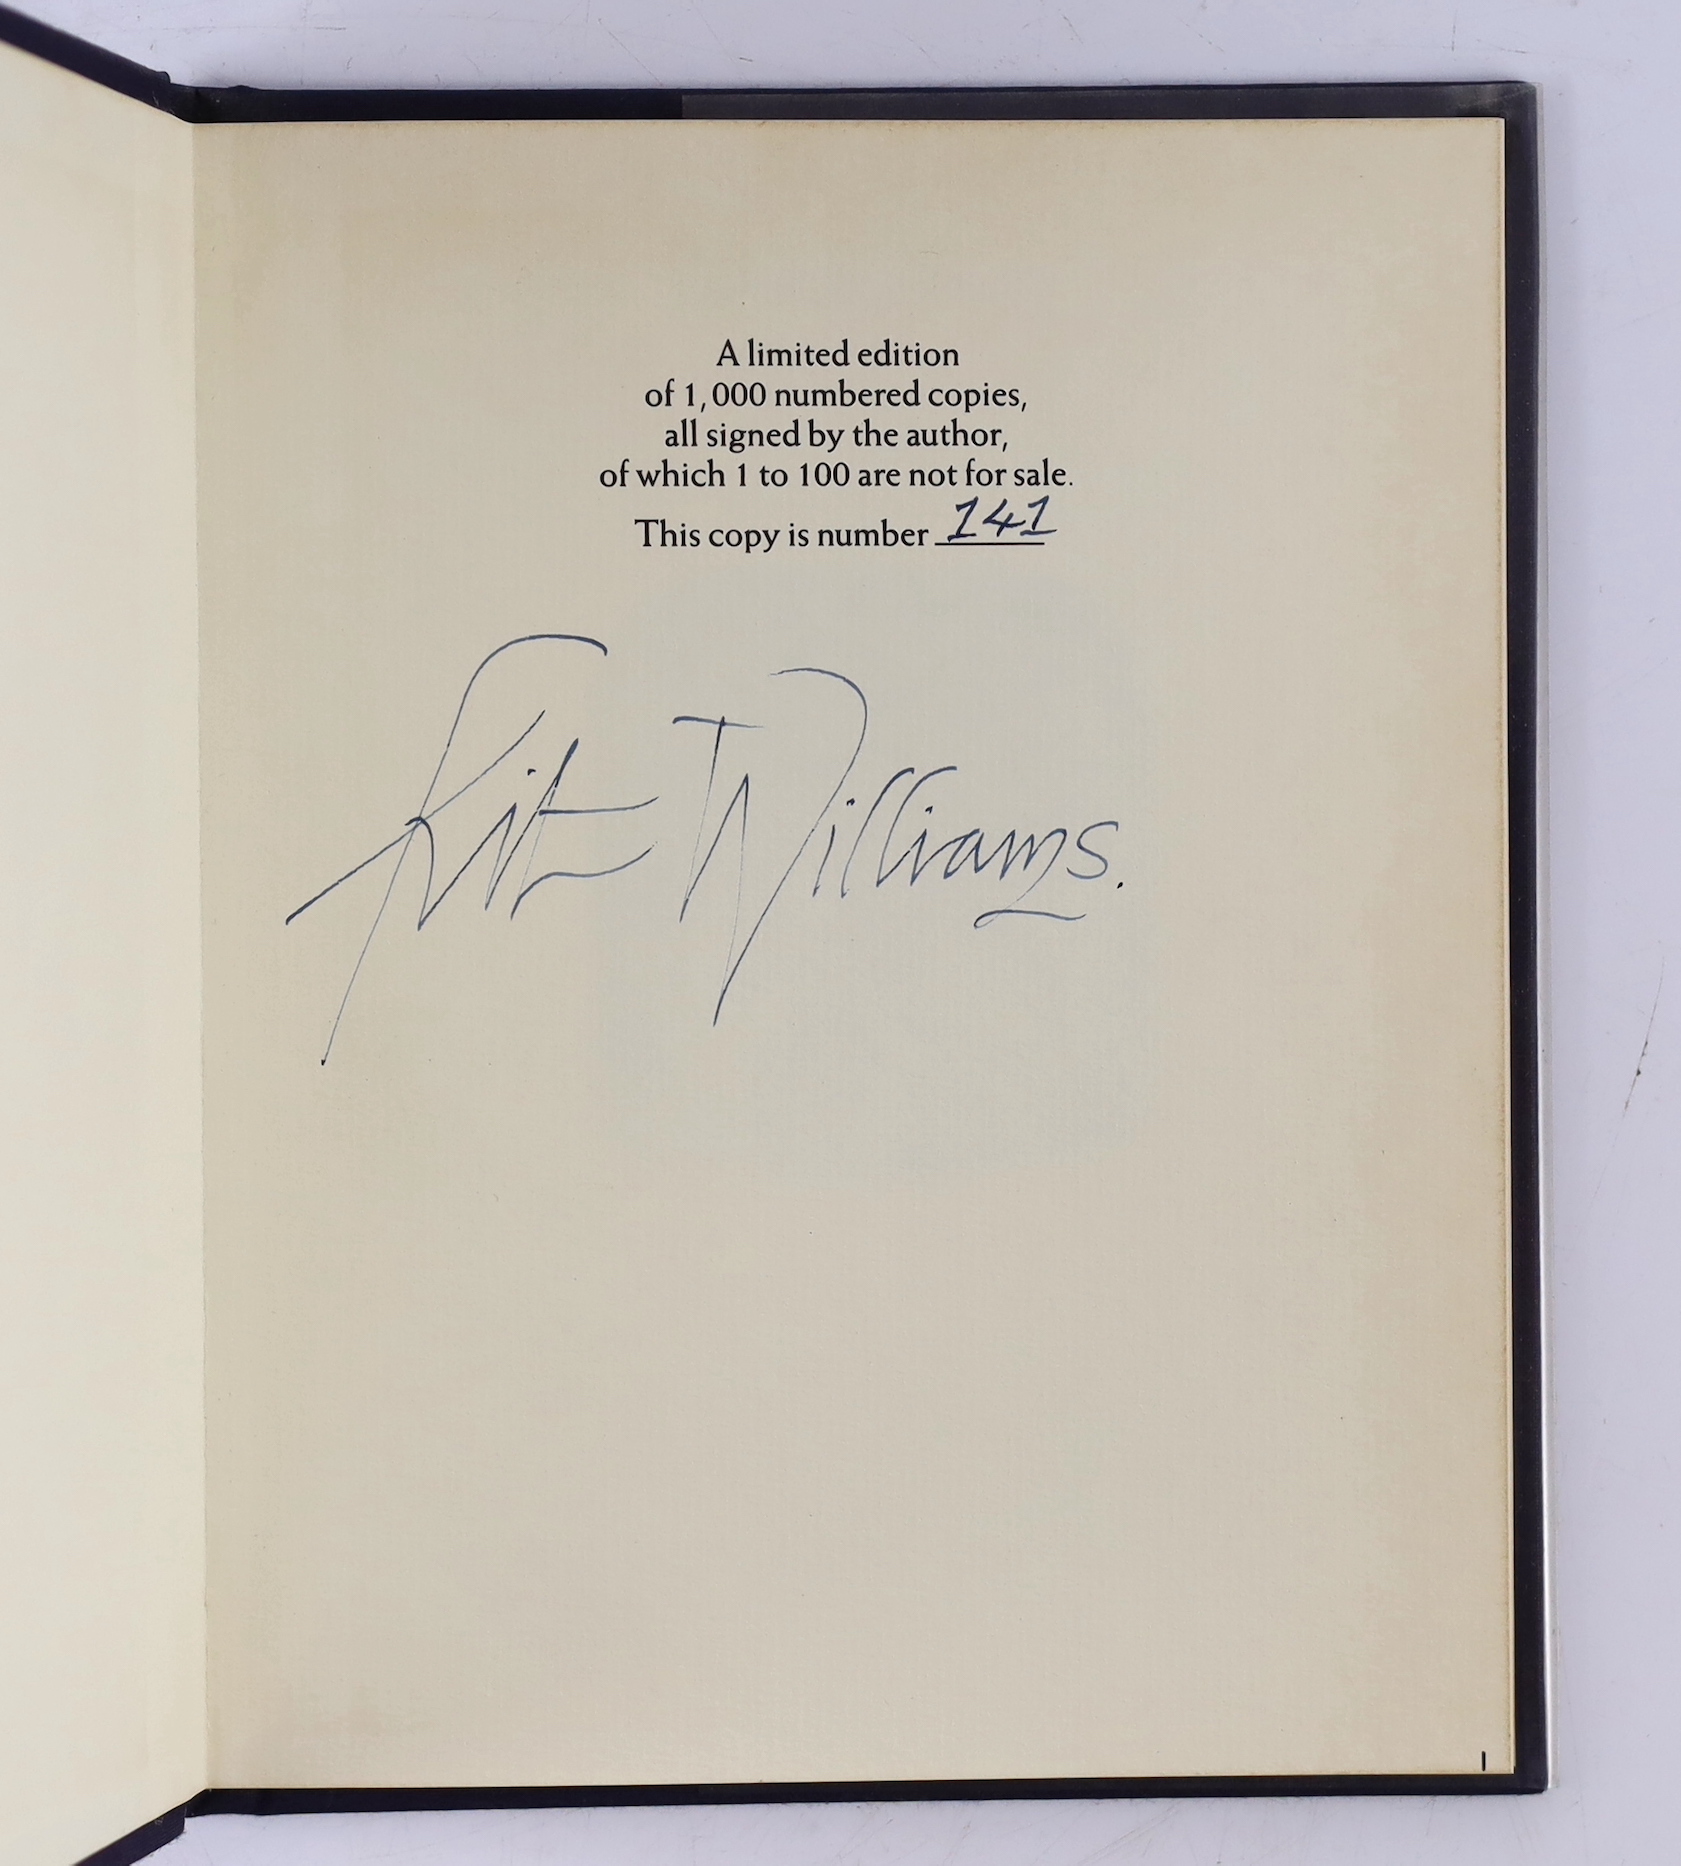 Williams, Kit. Masquerade. 1979. Number 141 of a limited edition of 1,000 copies signed by the author.